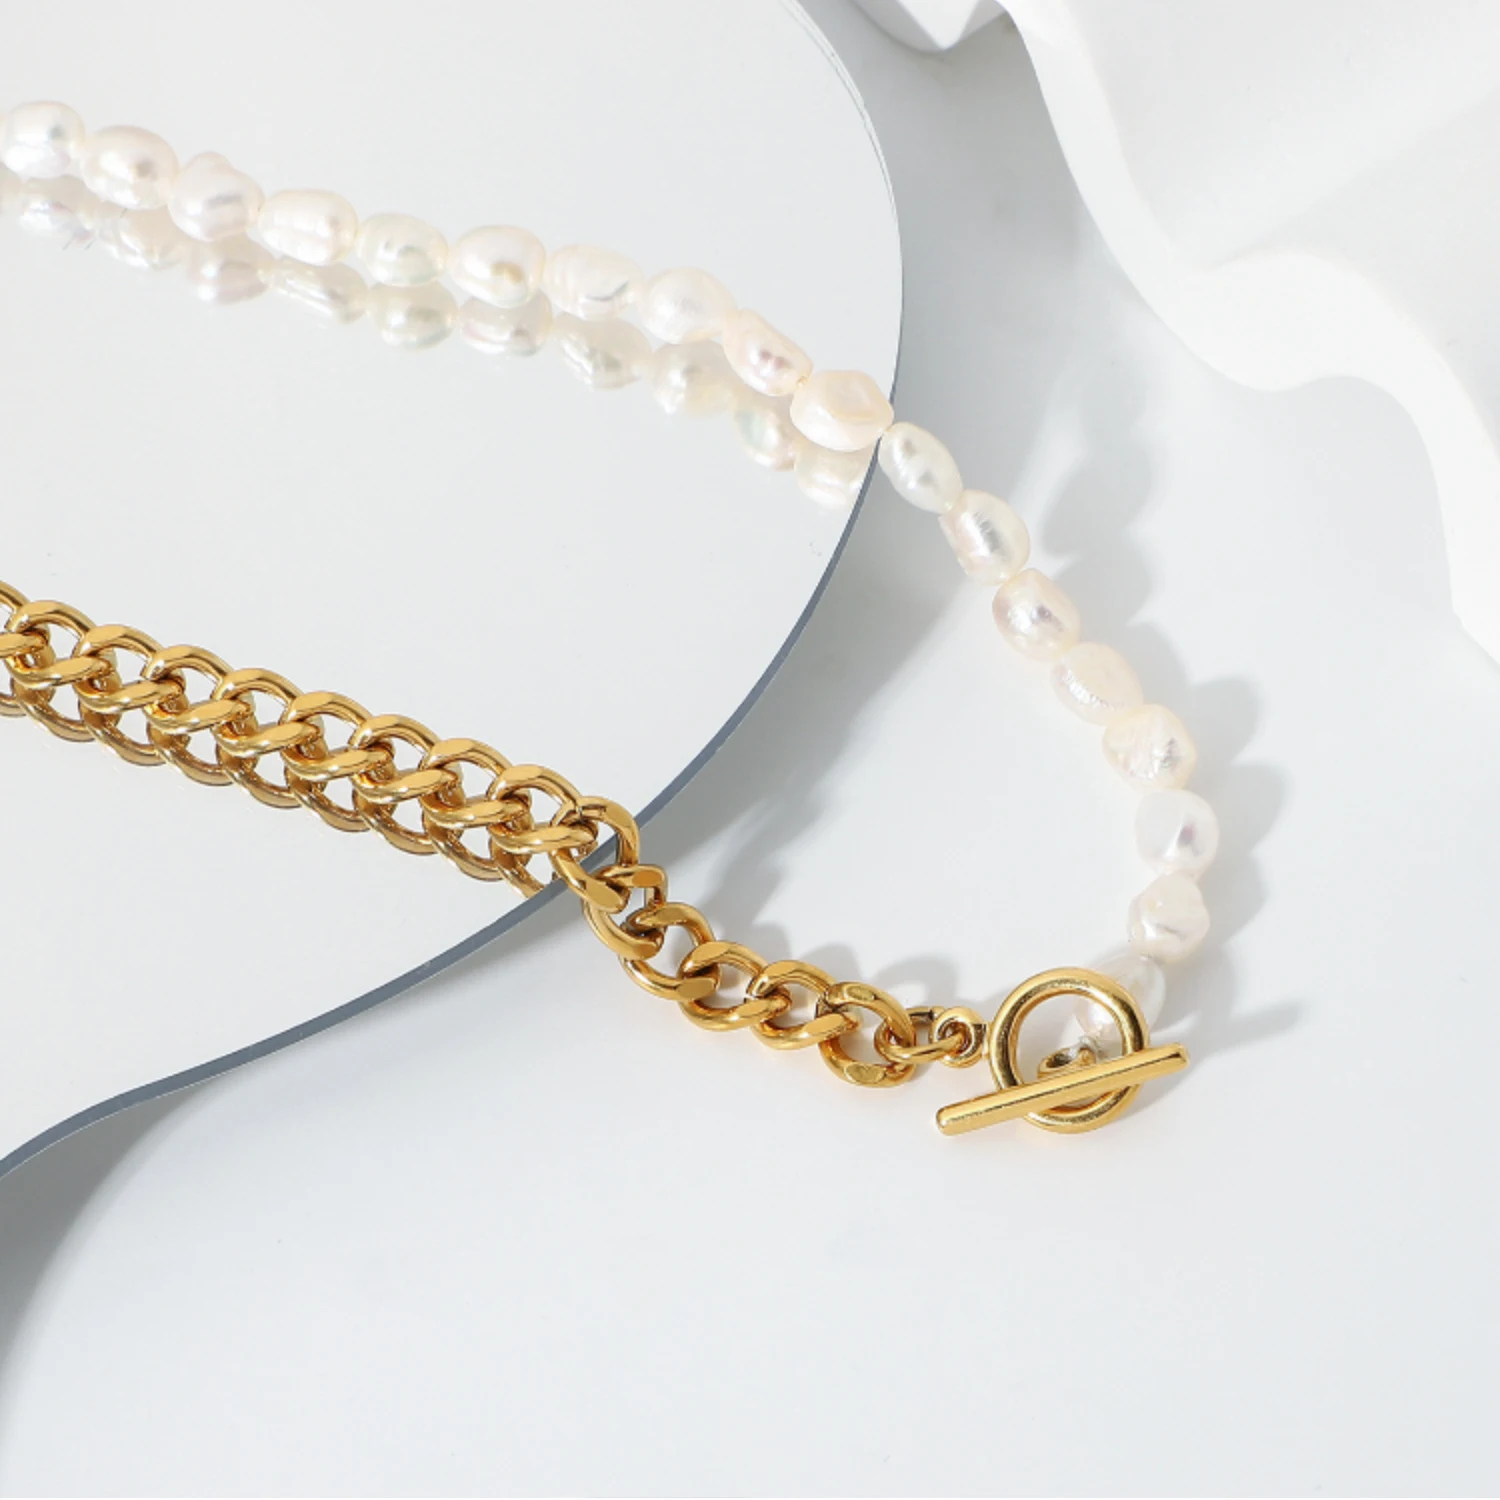 Pearl Chain Necklace 18k Gold Trendy Freshwater Pearl Necklace Cuban Link Necklace Half Pearl Half Chain Necklace for Women 